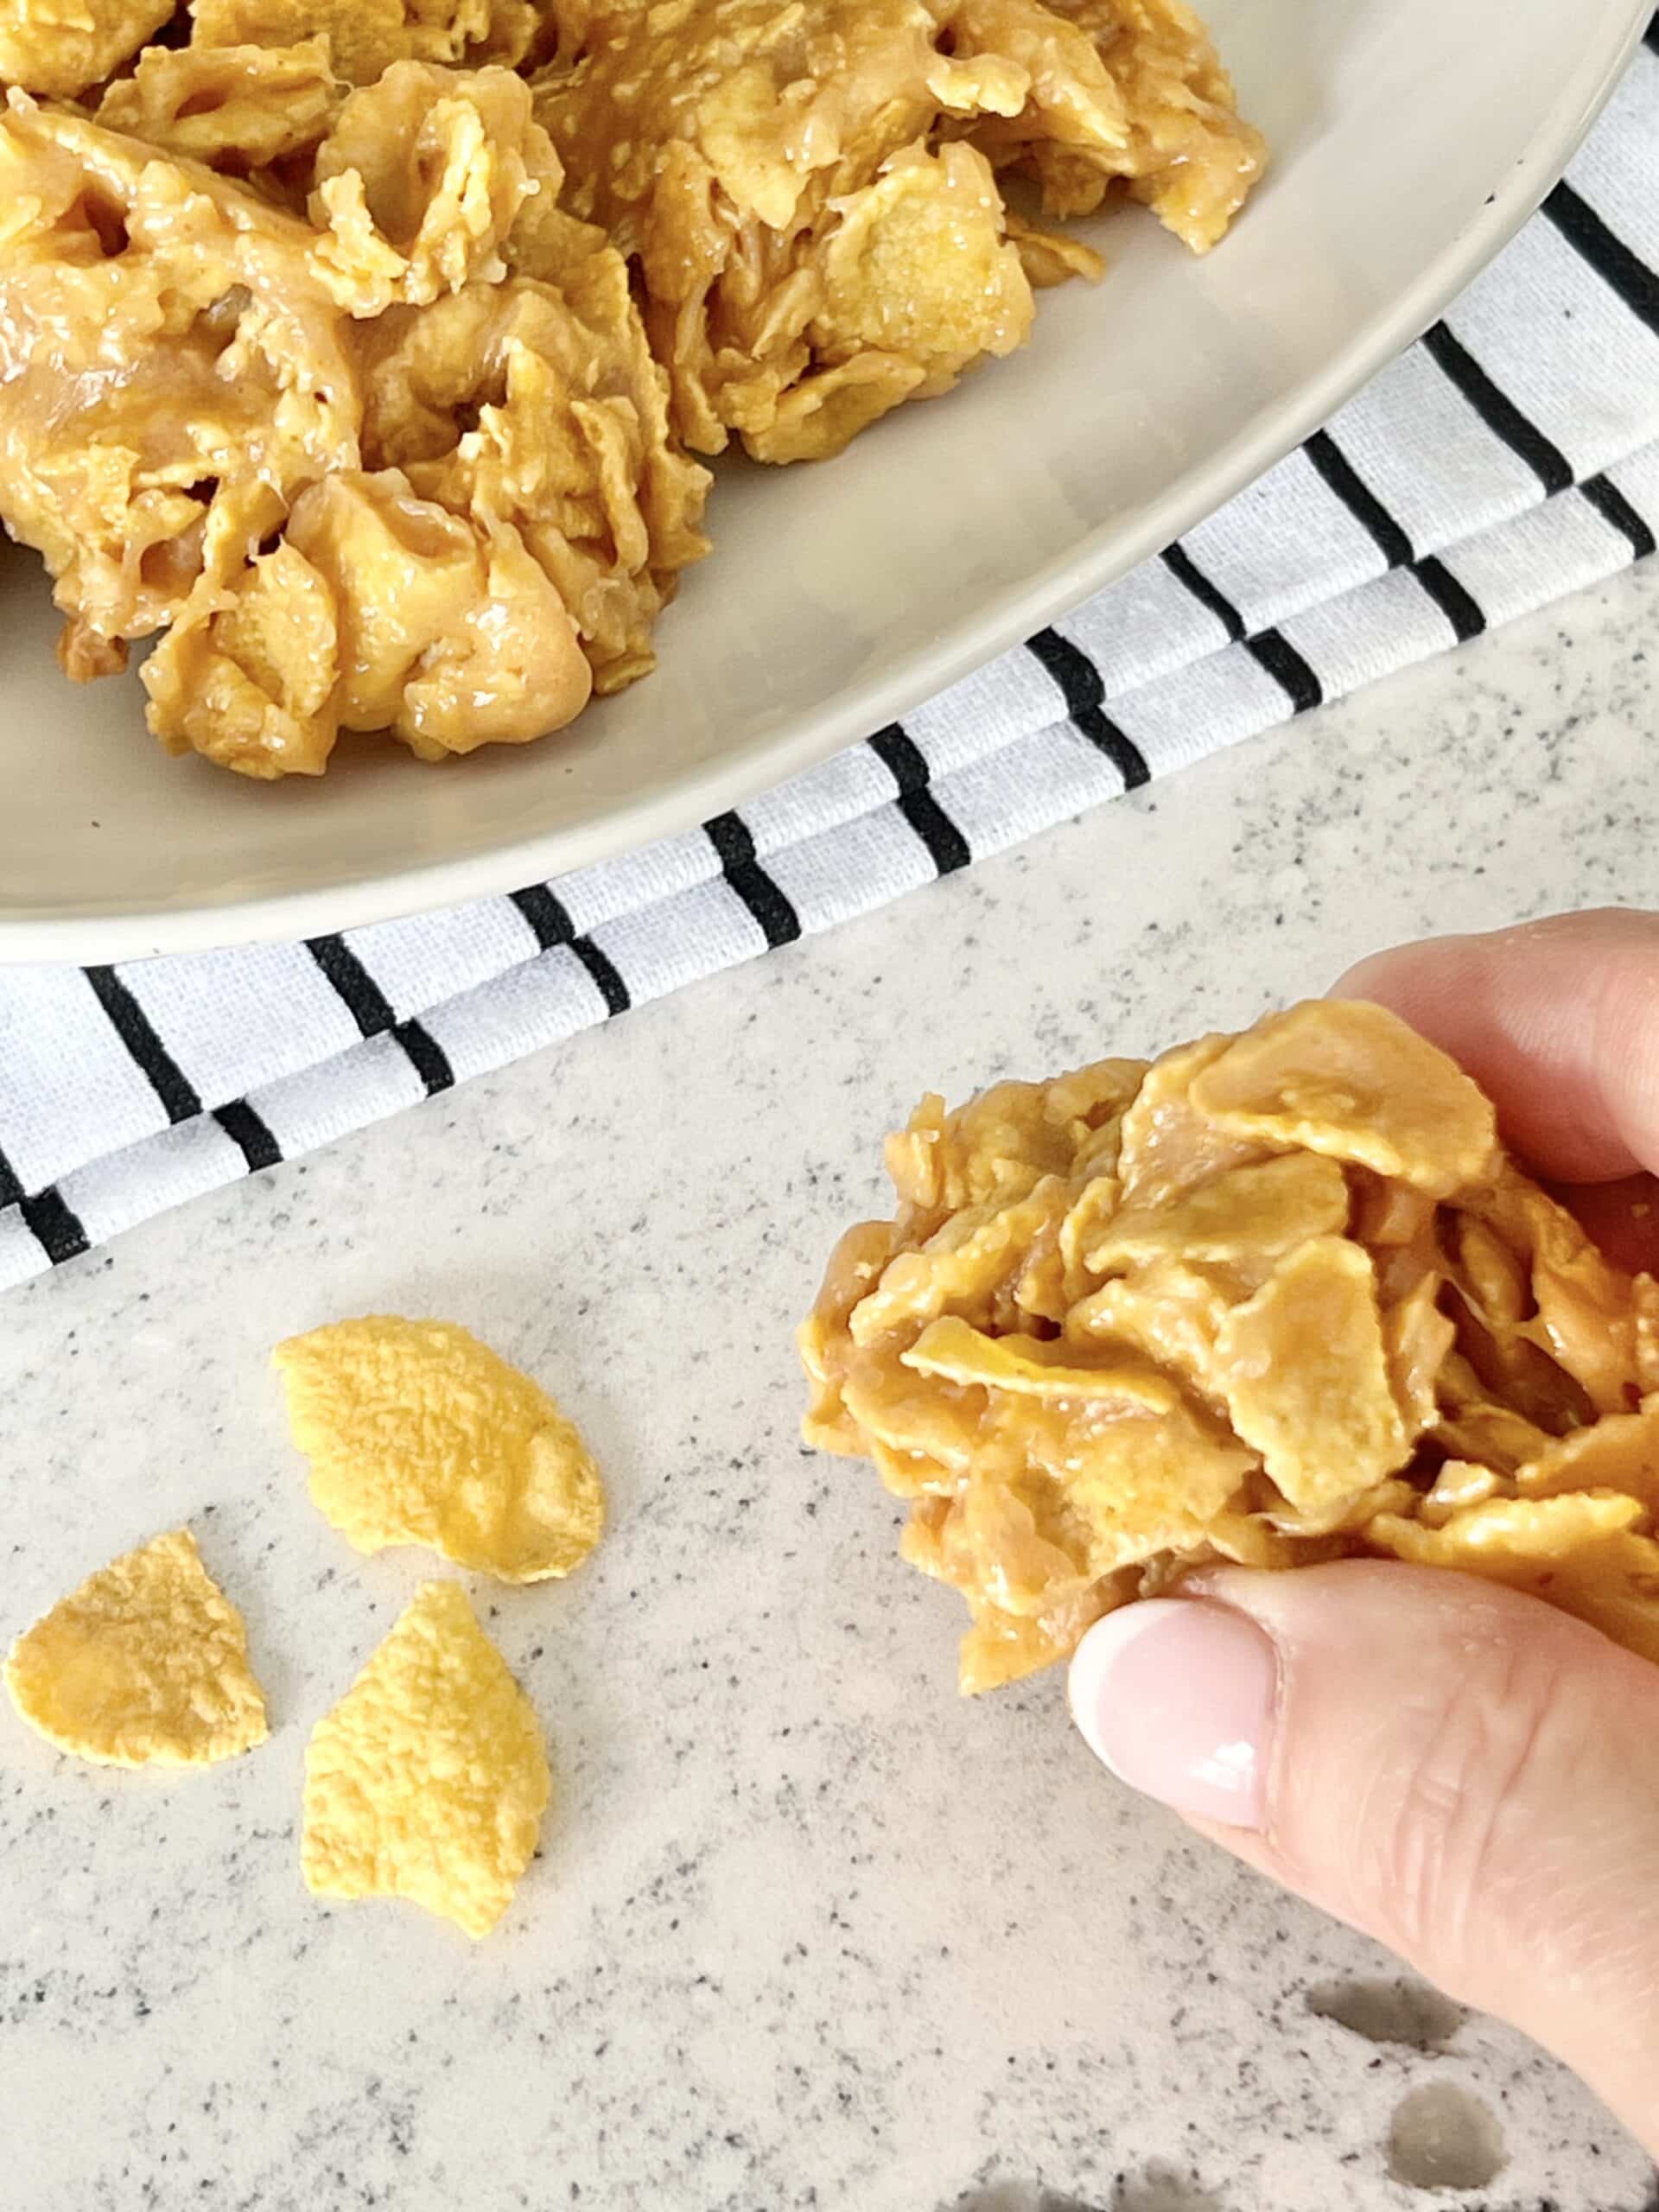 The Best of the Peanut Butter Cereal Cookie Recipes